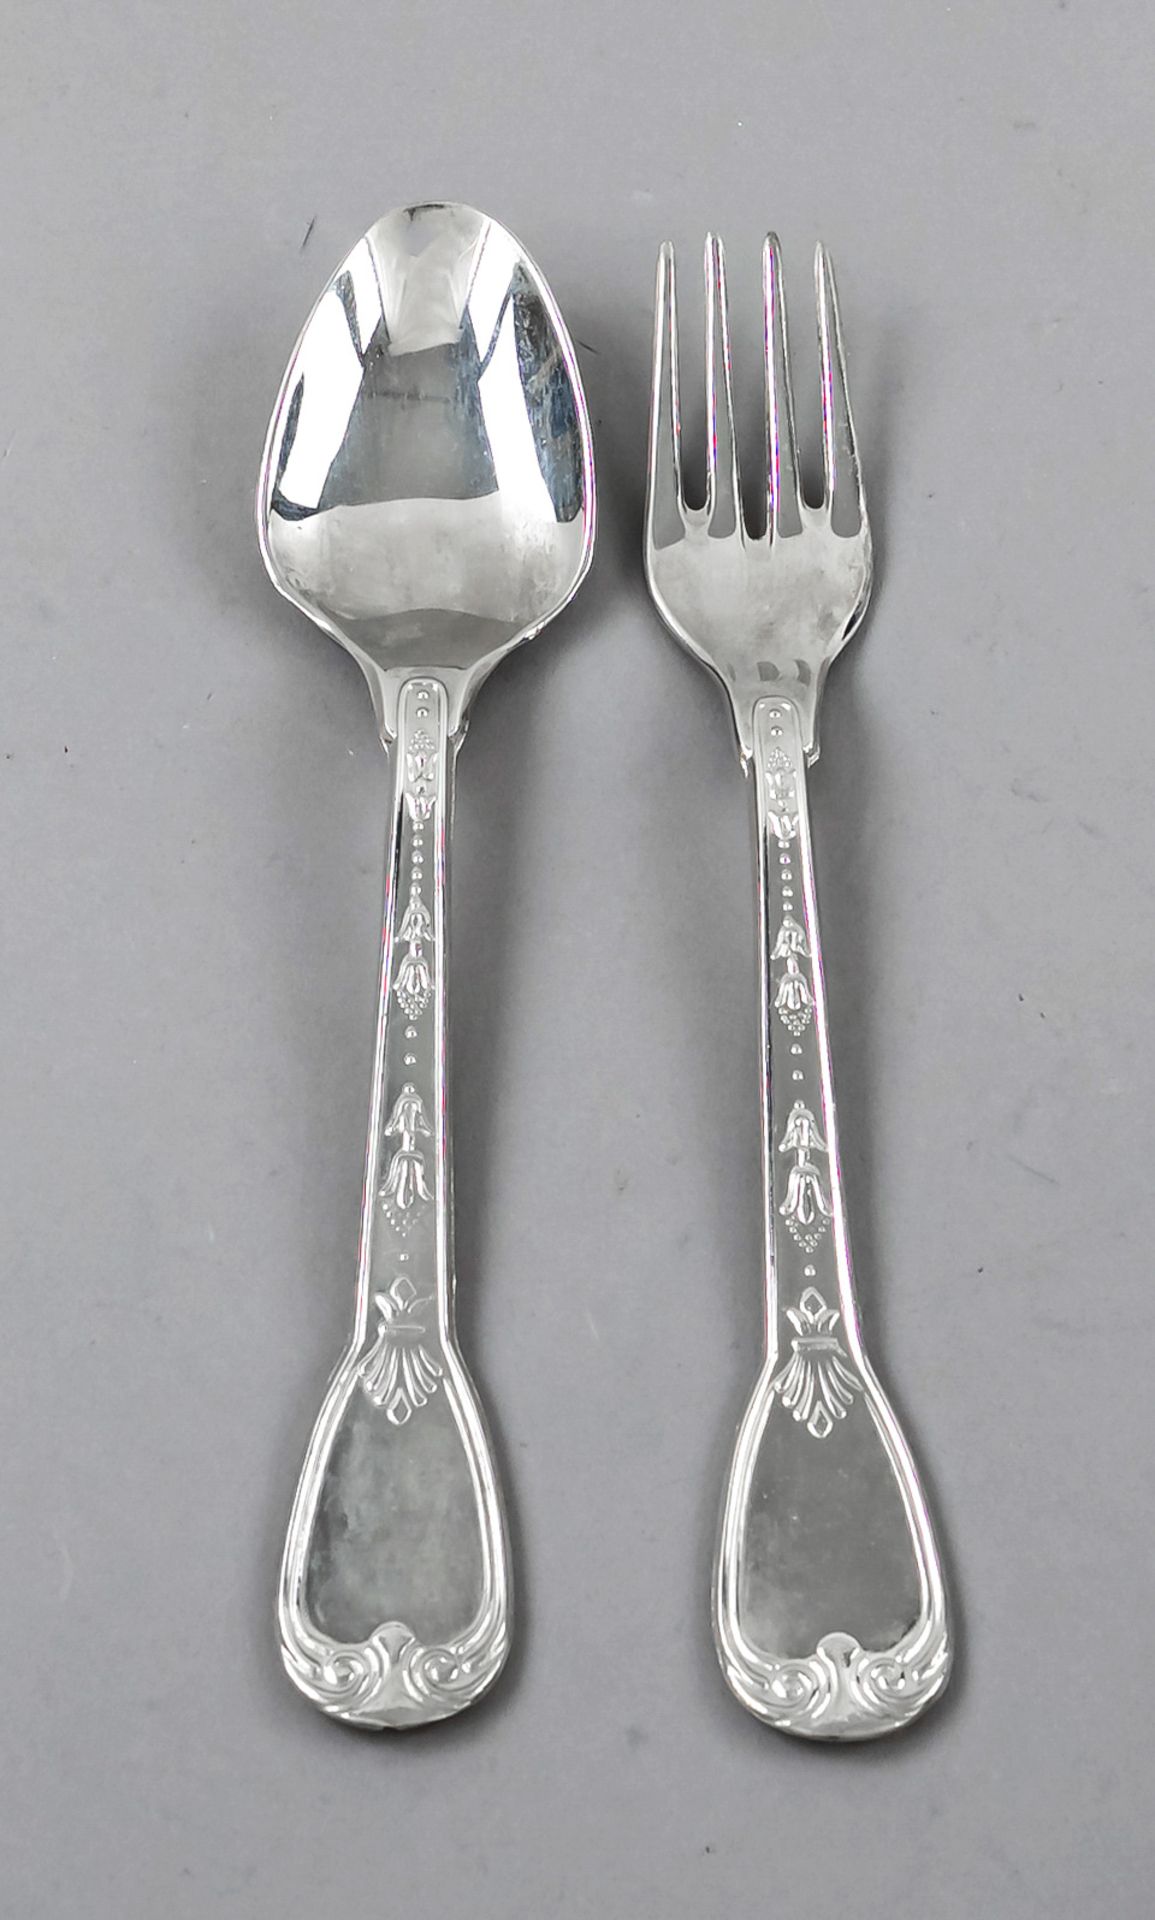 Twelve pieces of cutlery, 20th century, silver 800/000, with ornamental decor, 6 spoons and forks